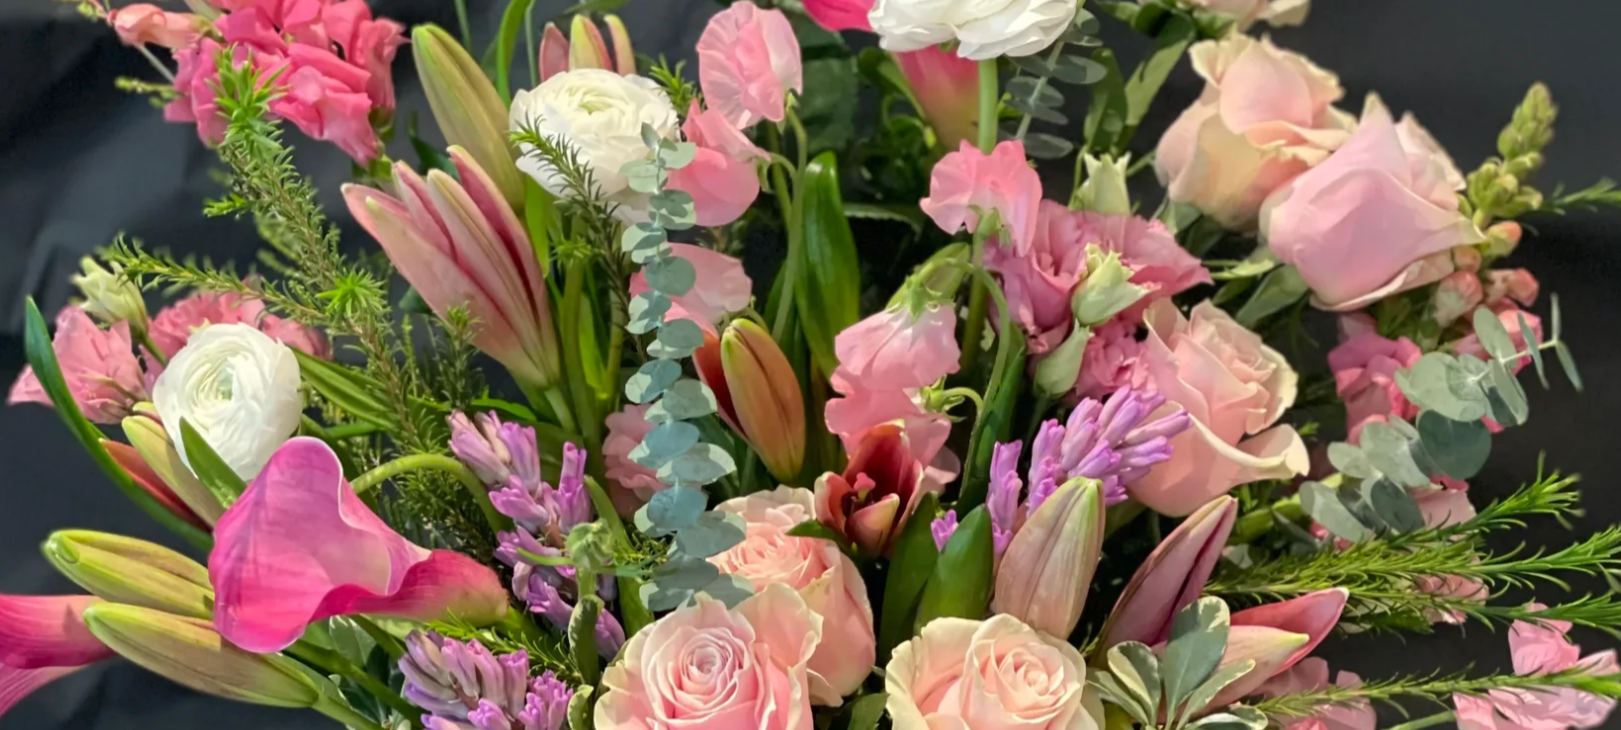 A beautiful bouquet of pink and white flowers to help illustrate Shop Valentine's Day flowers in Portland, OR